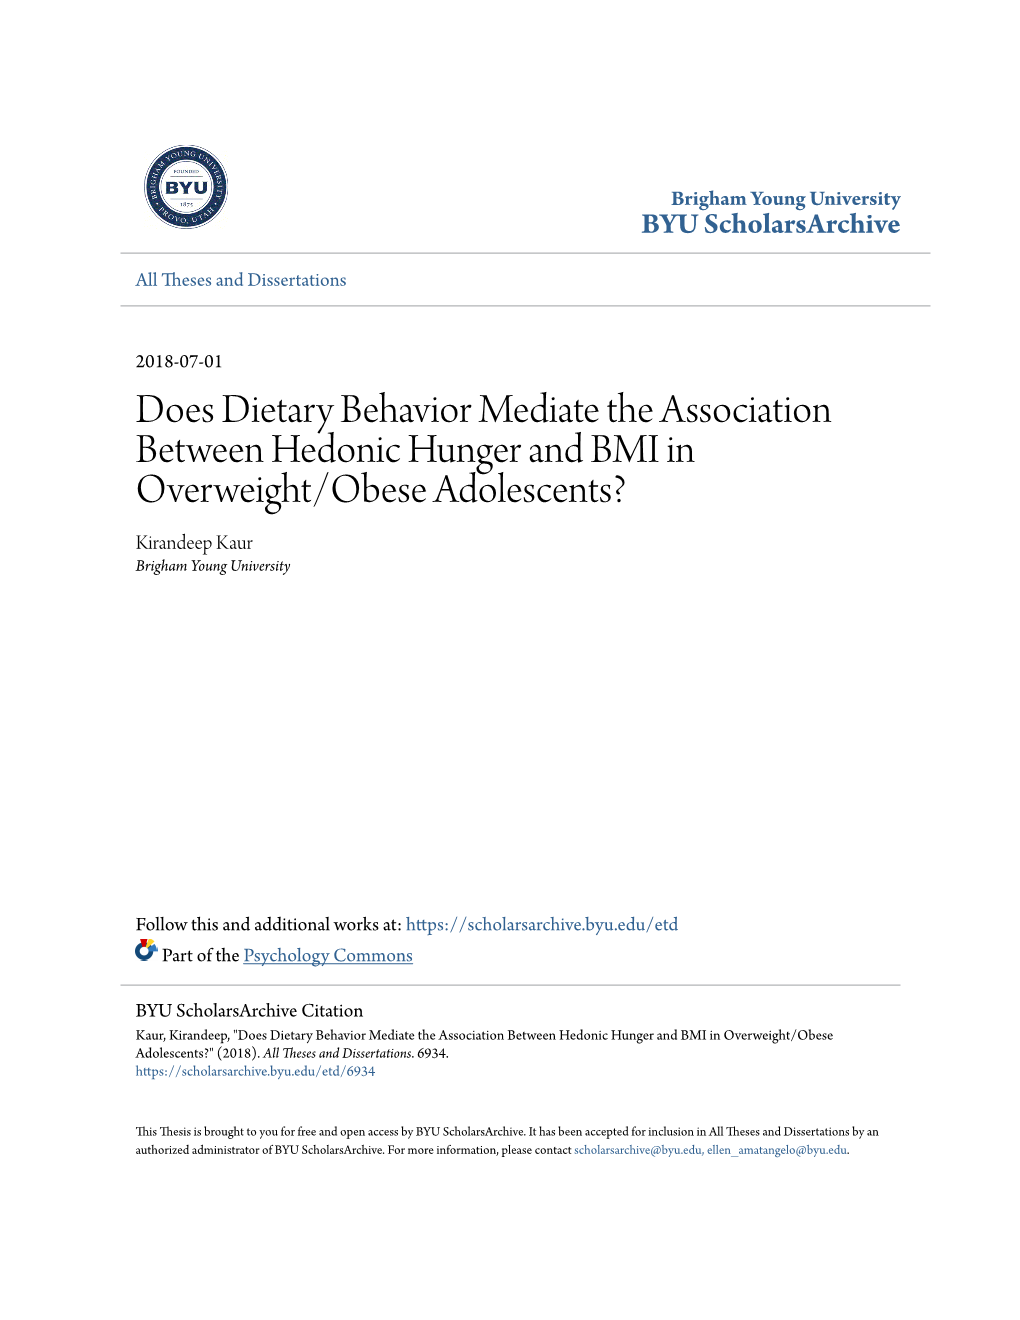 Does Dietary Behavior Mediate the Association Between Hedonic Hunger and BMI in Overweight/Obese Adolescents? Kirandeep Kaur Brigham Young University